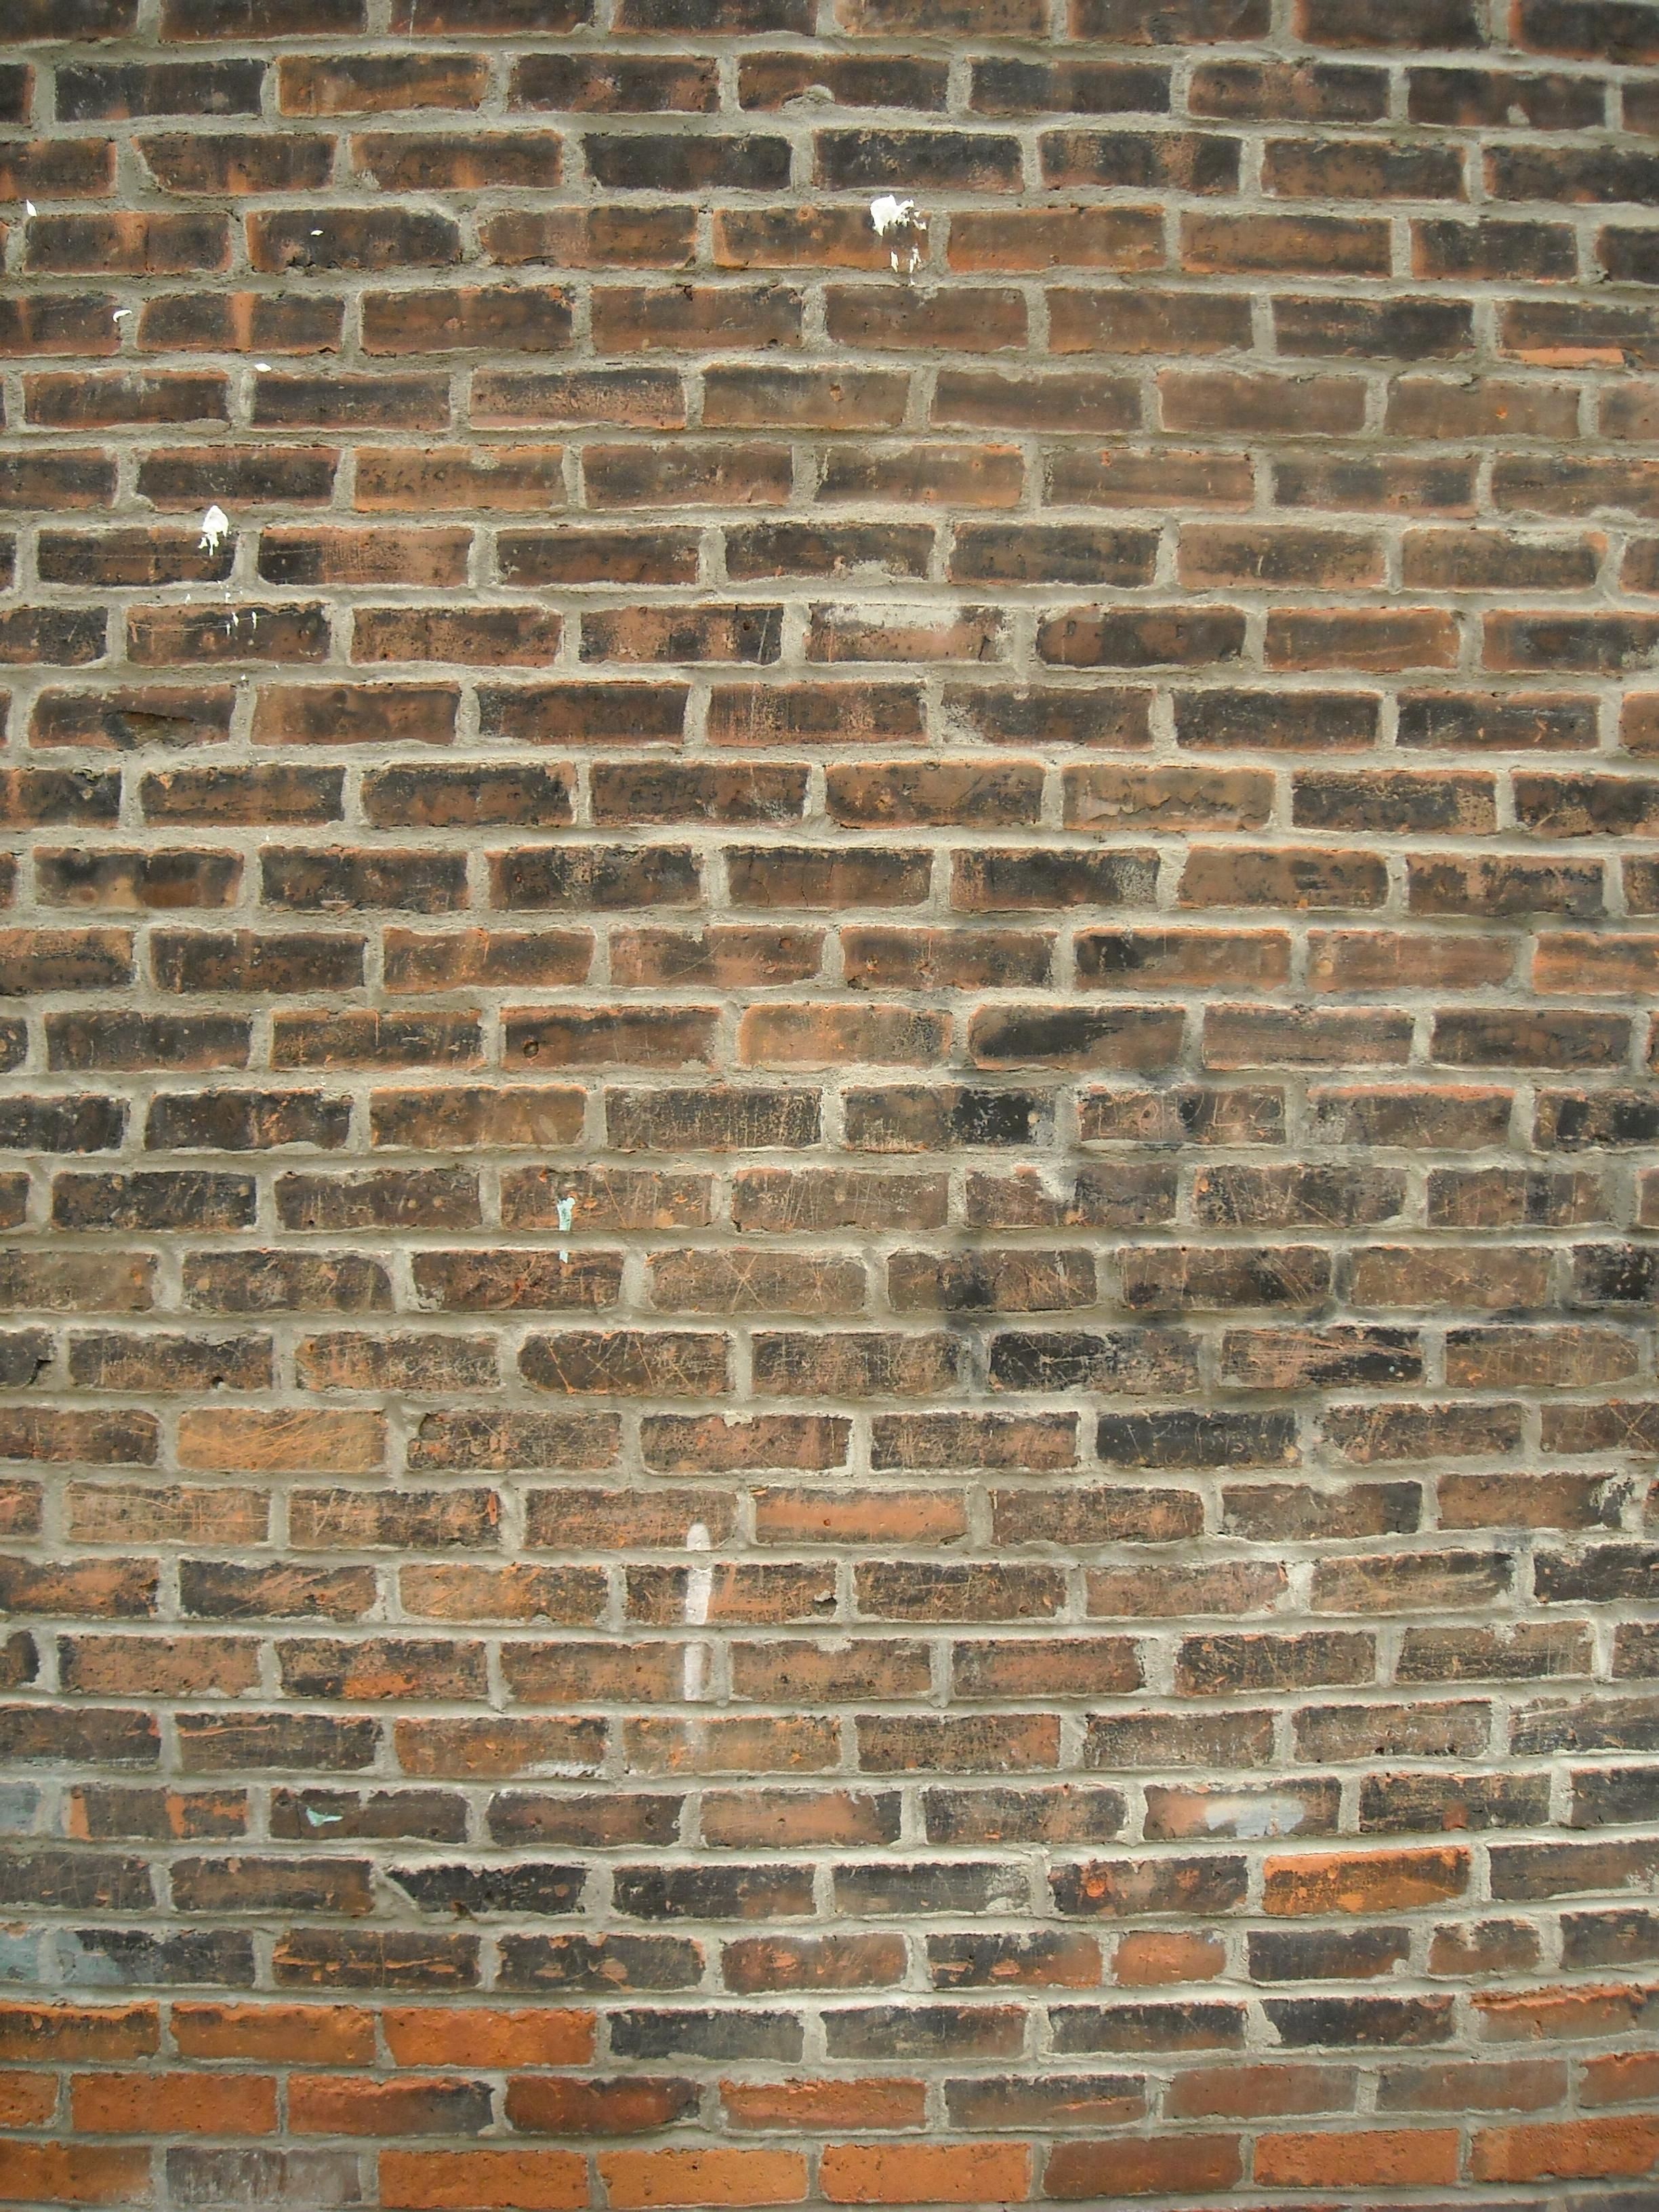 File:Brick high definition texture.jpg - Wikimedia Commons